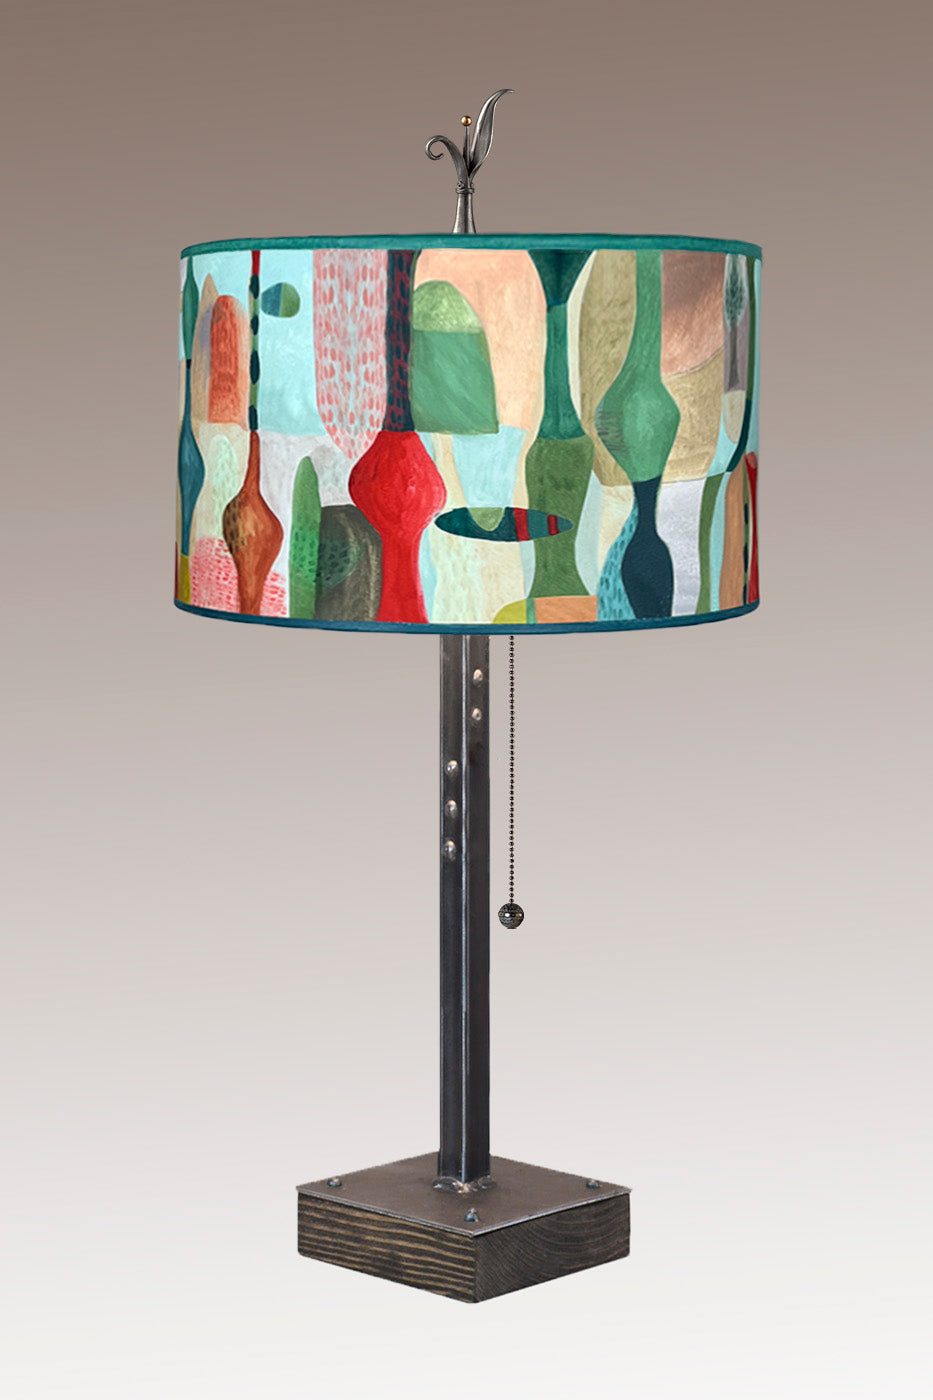 Janna Ugone & Co Table Lamp Steel Table Lamp on Wood with Large Drum Shade in Riviera in Poppy